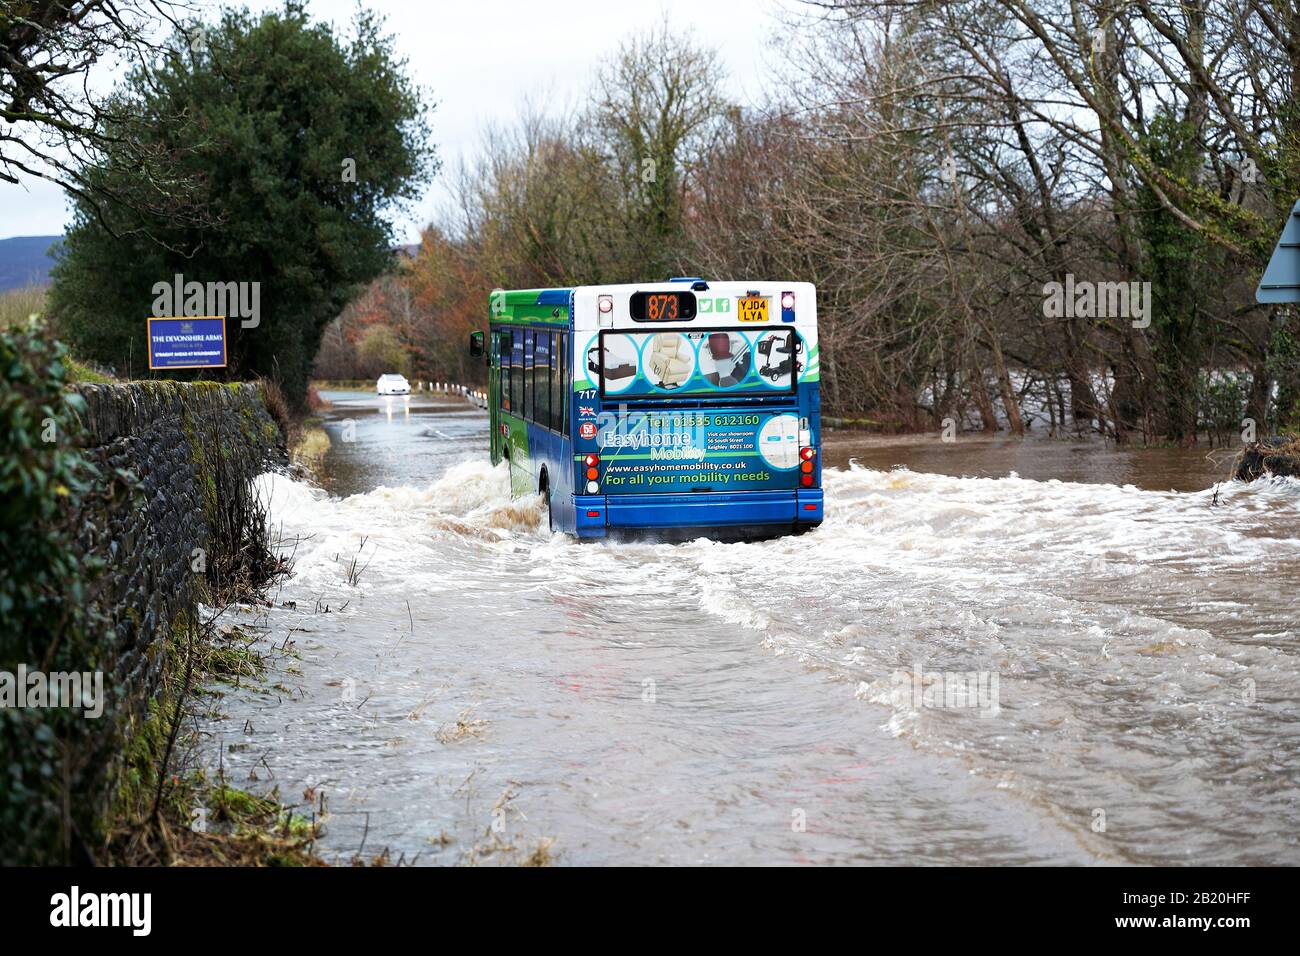 A bus travels along a flooded road where the River Wharfe has burst its banks in Addingham West Yorkshire during storm Dennis 09-02-20 Stock Photo